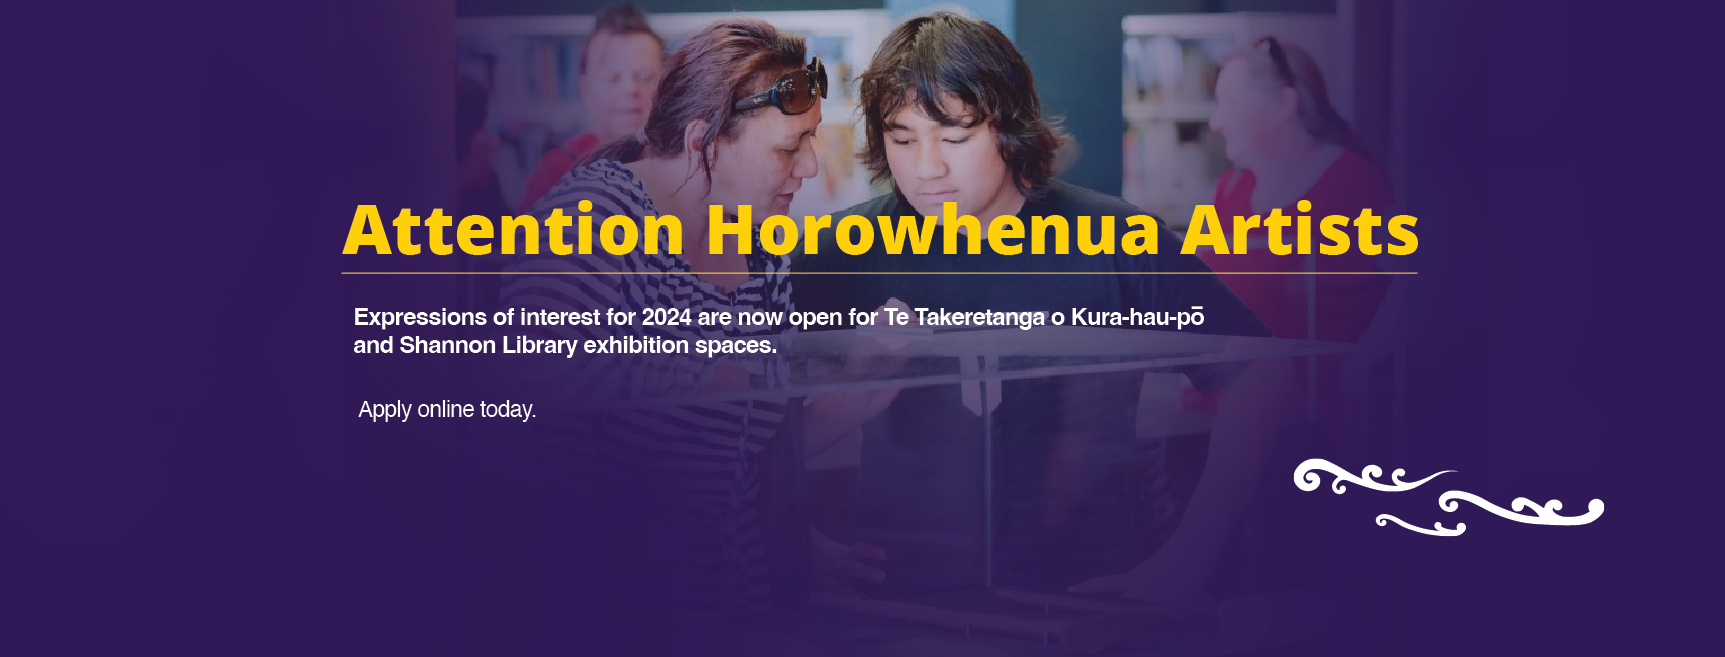 Attention Horowhenua Artists, Expressions of interest are now open for Te Takeretanga o Kira-hau-pō and Shannon Library exhibition spaces.